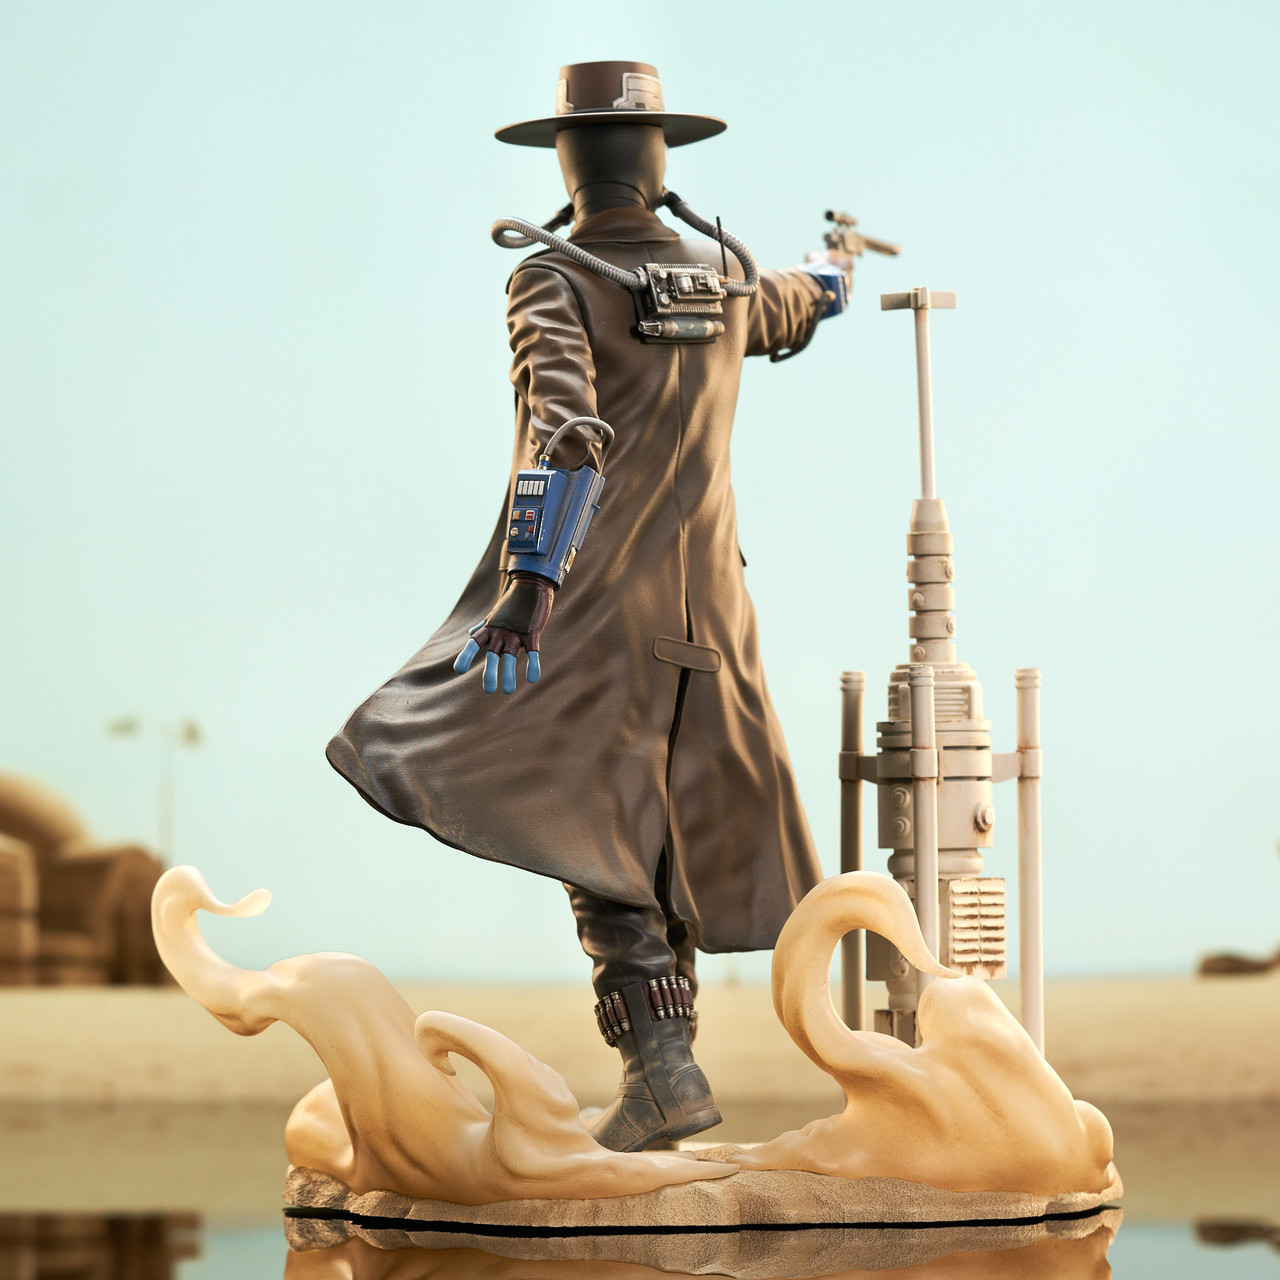 Cad Bane and Other Diamond Select Star Wars Collectibles Now Available for  Pre-Order